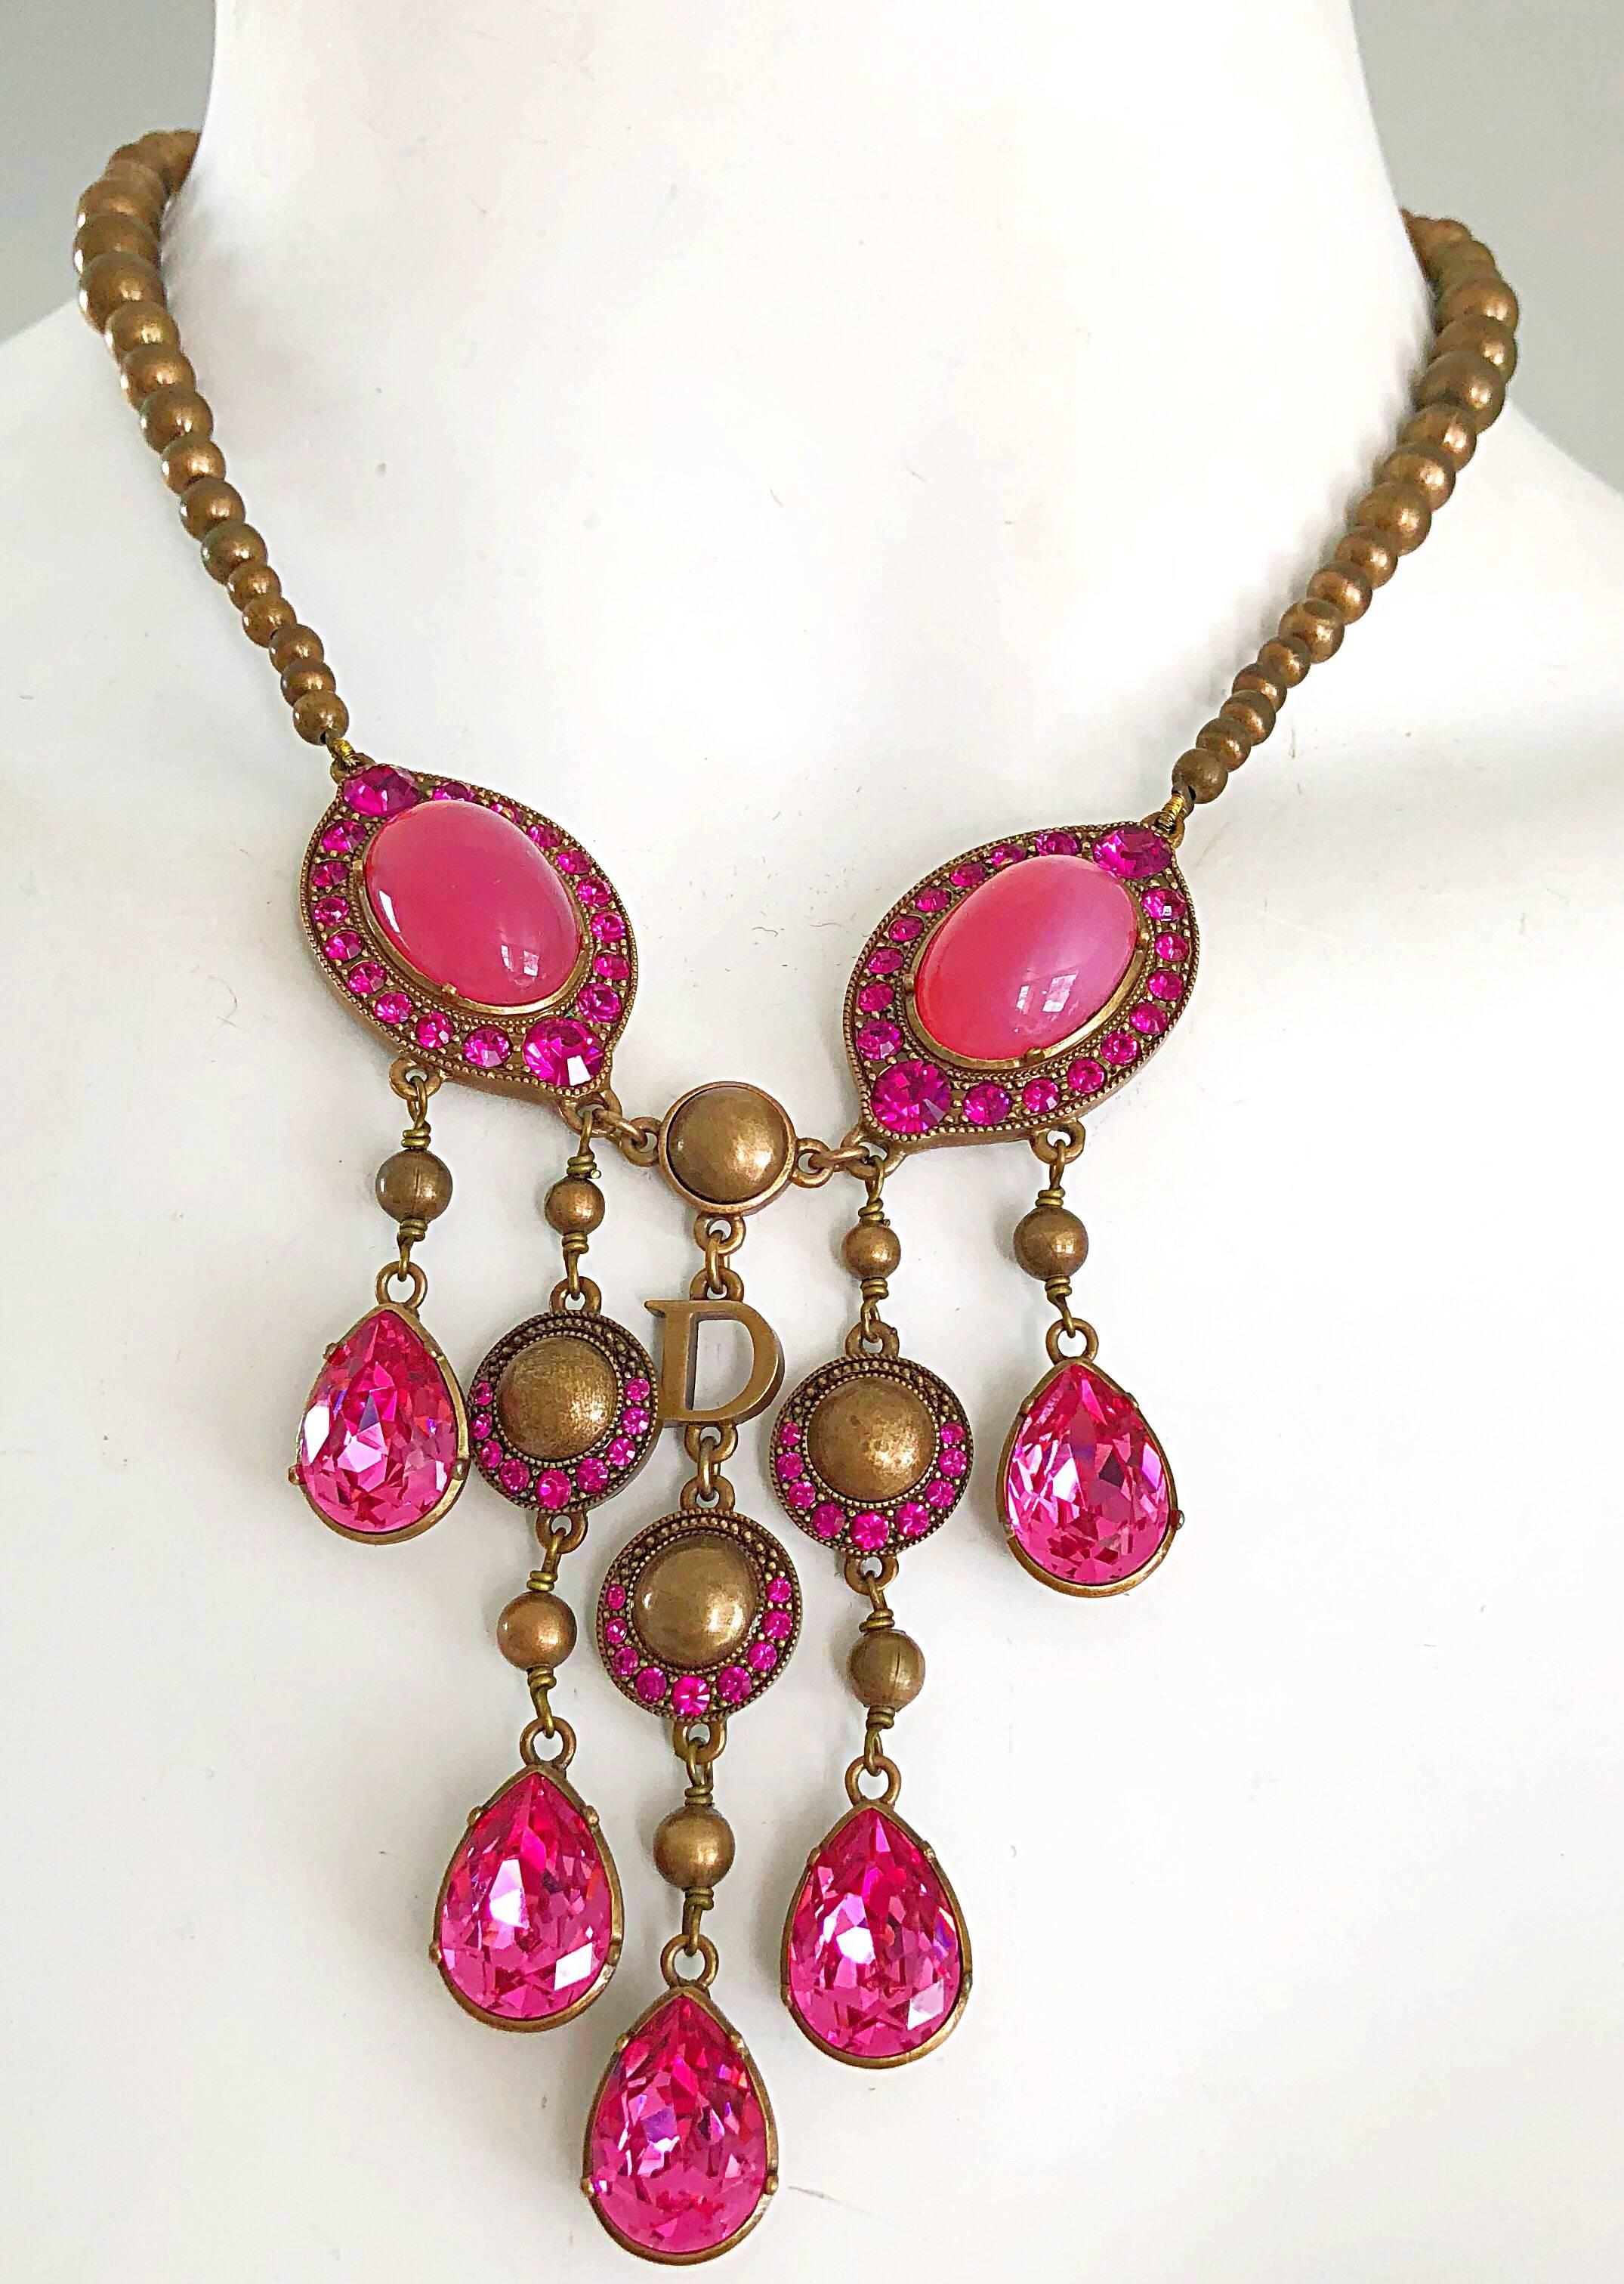 Stunning CHRISTIAN DIOR hot pink rhinestone golden bronze necklace! Features two large pink stones on each side, with five strands that dangle. Adjustable length to make choker length or longer. Great with jeans, a dress or a gown. In great unworn